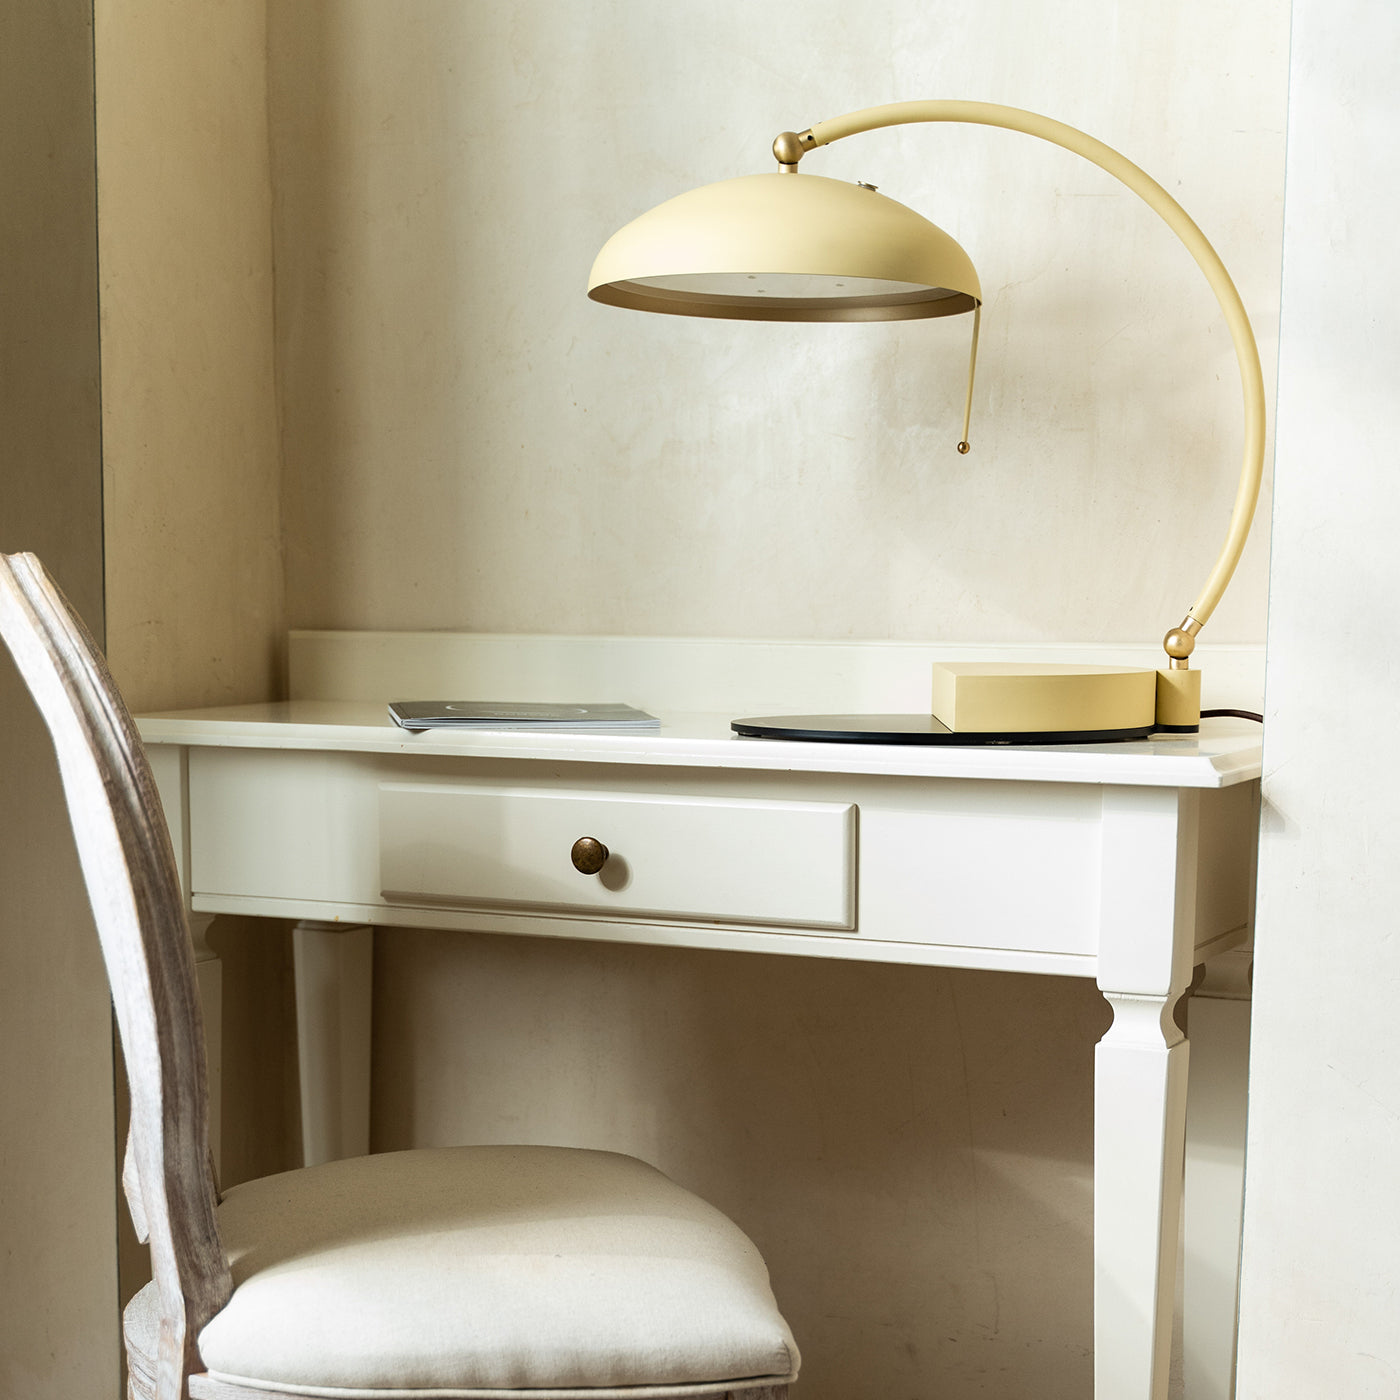 Serena Ministeriale Yellow Table Lamp - Alternative view 1